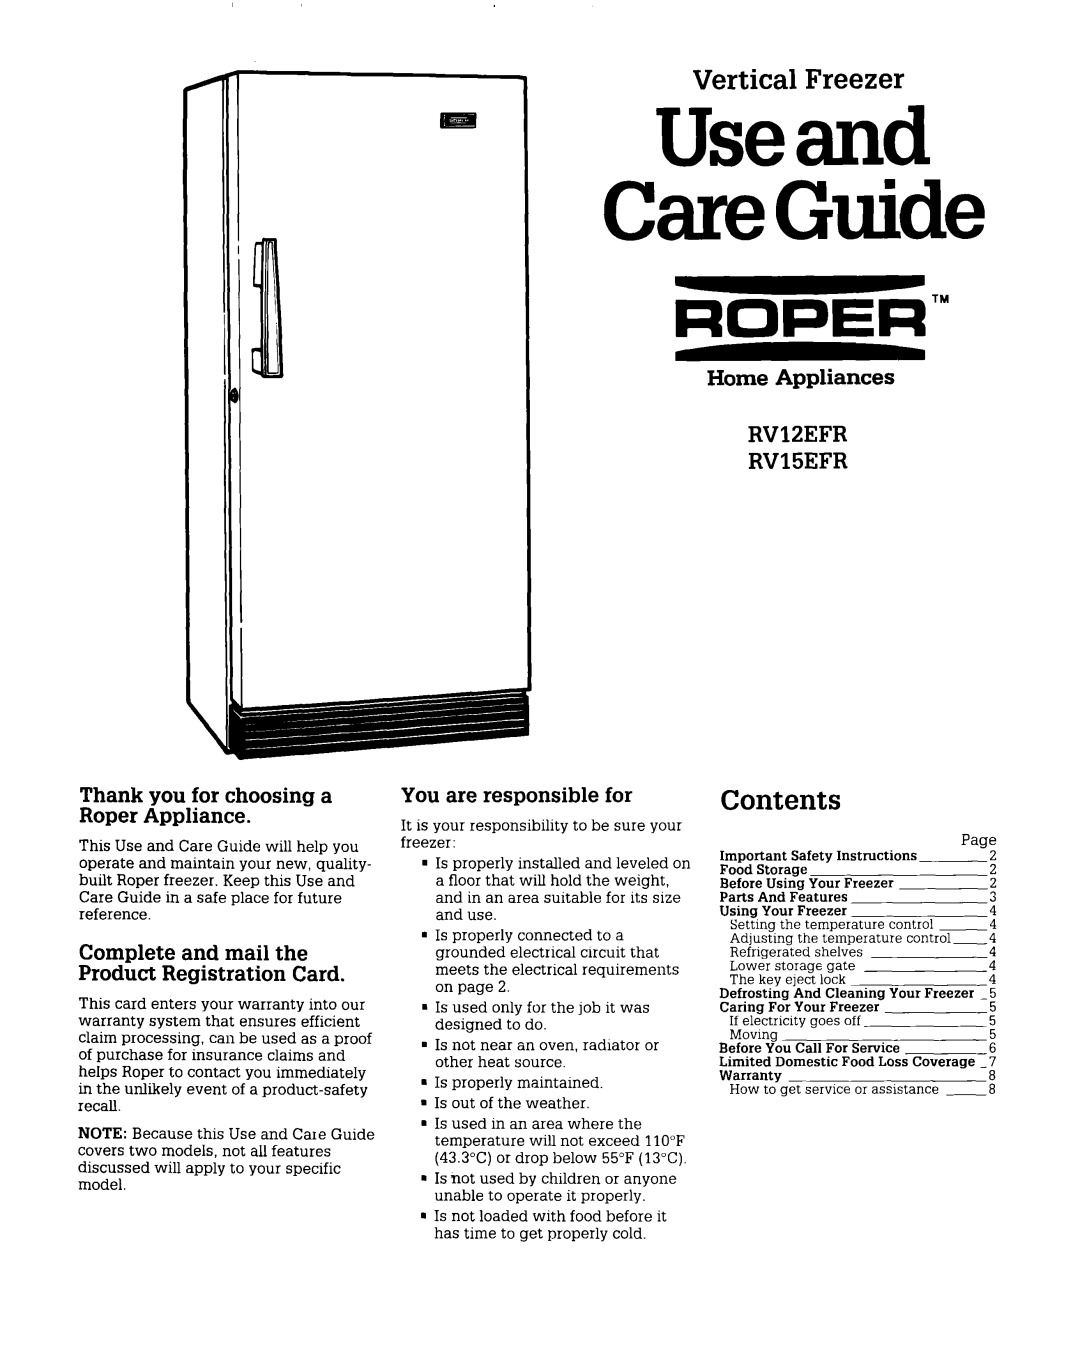 Whirlpool RV15EFR warranty Vertical Freezer, Contents, Home Appliances, Thank you for choosing a Roper Appliance, tiTM 